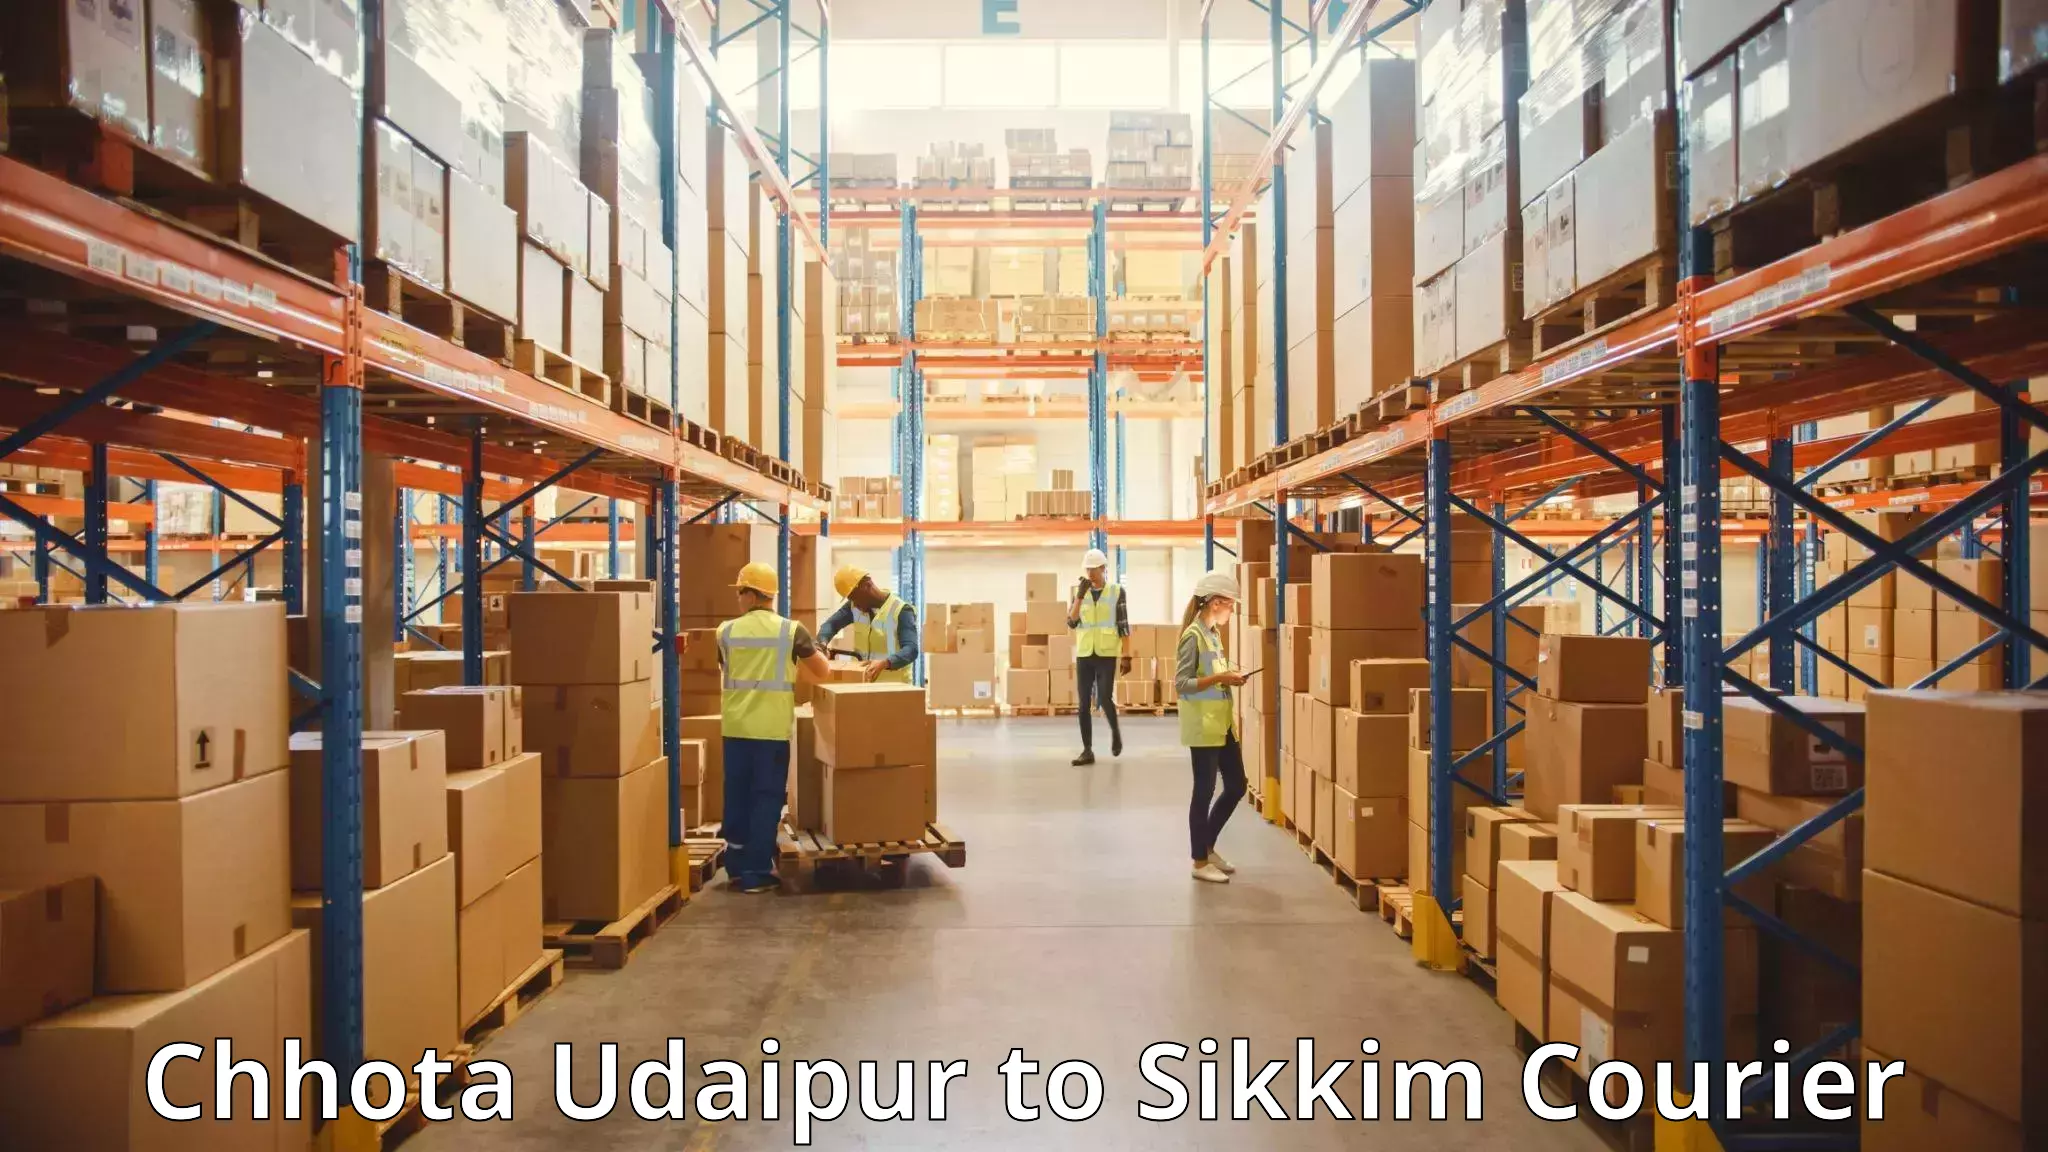 Luggage transport consulting in Chhota Udaipur to Sikkim